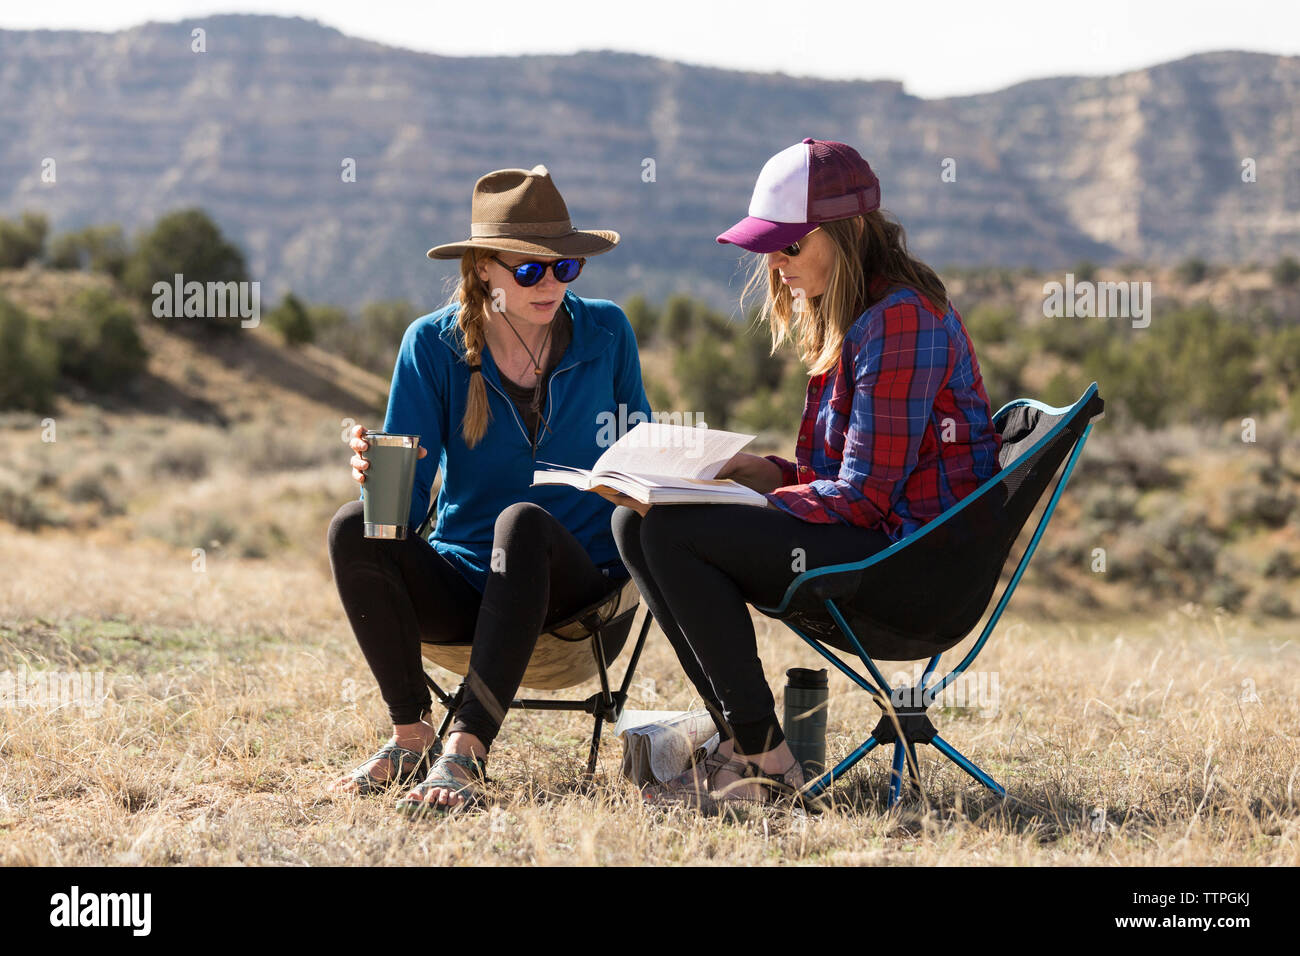 Female friends looking at book while sitting on camping chairs at field against mountains during sunny day Stock Photo